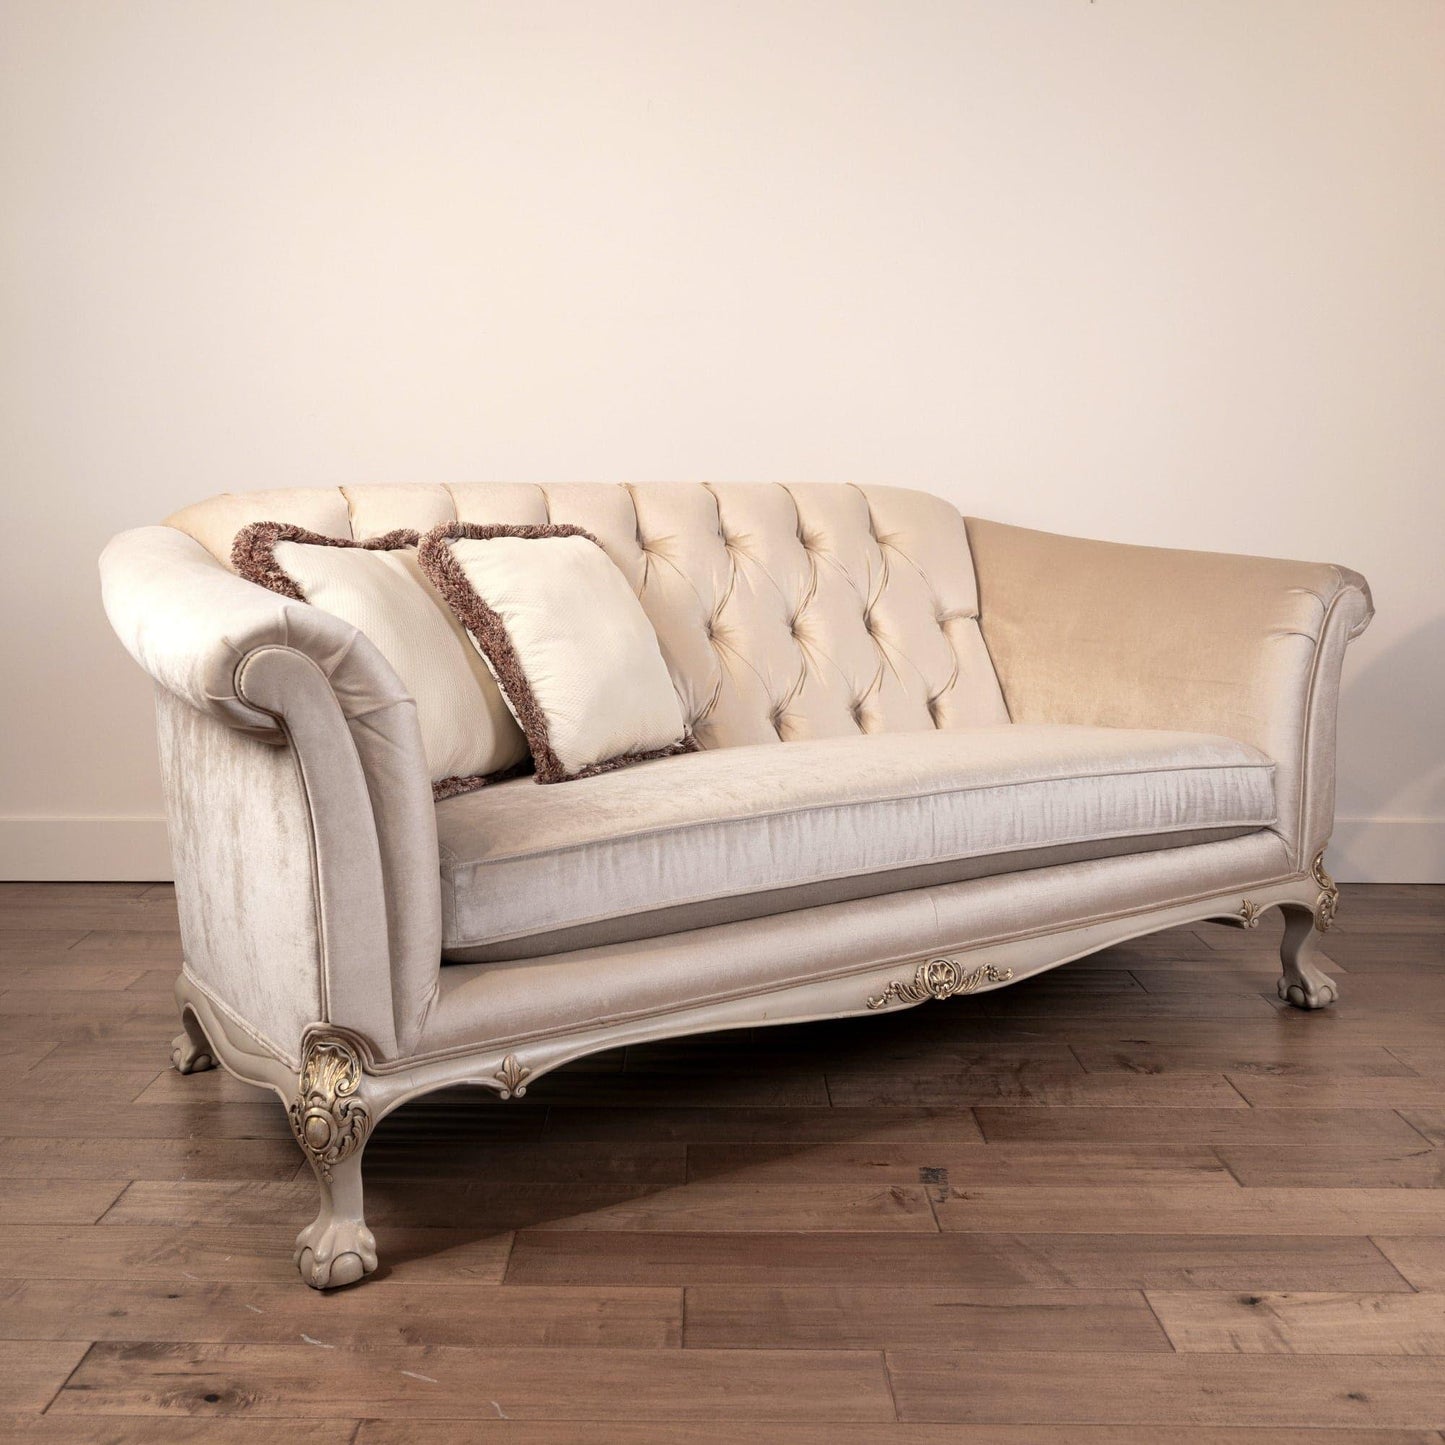 GEORGIAN TUFTED-BACK SOFA - House of Chippendale